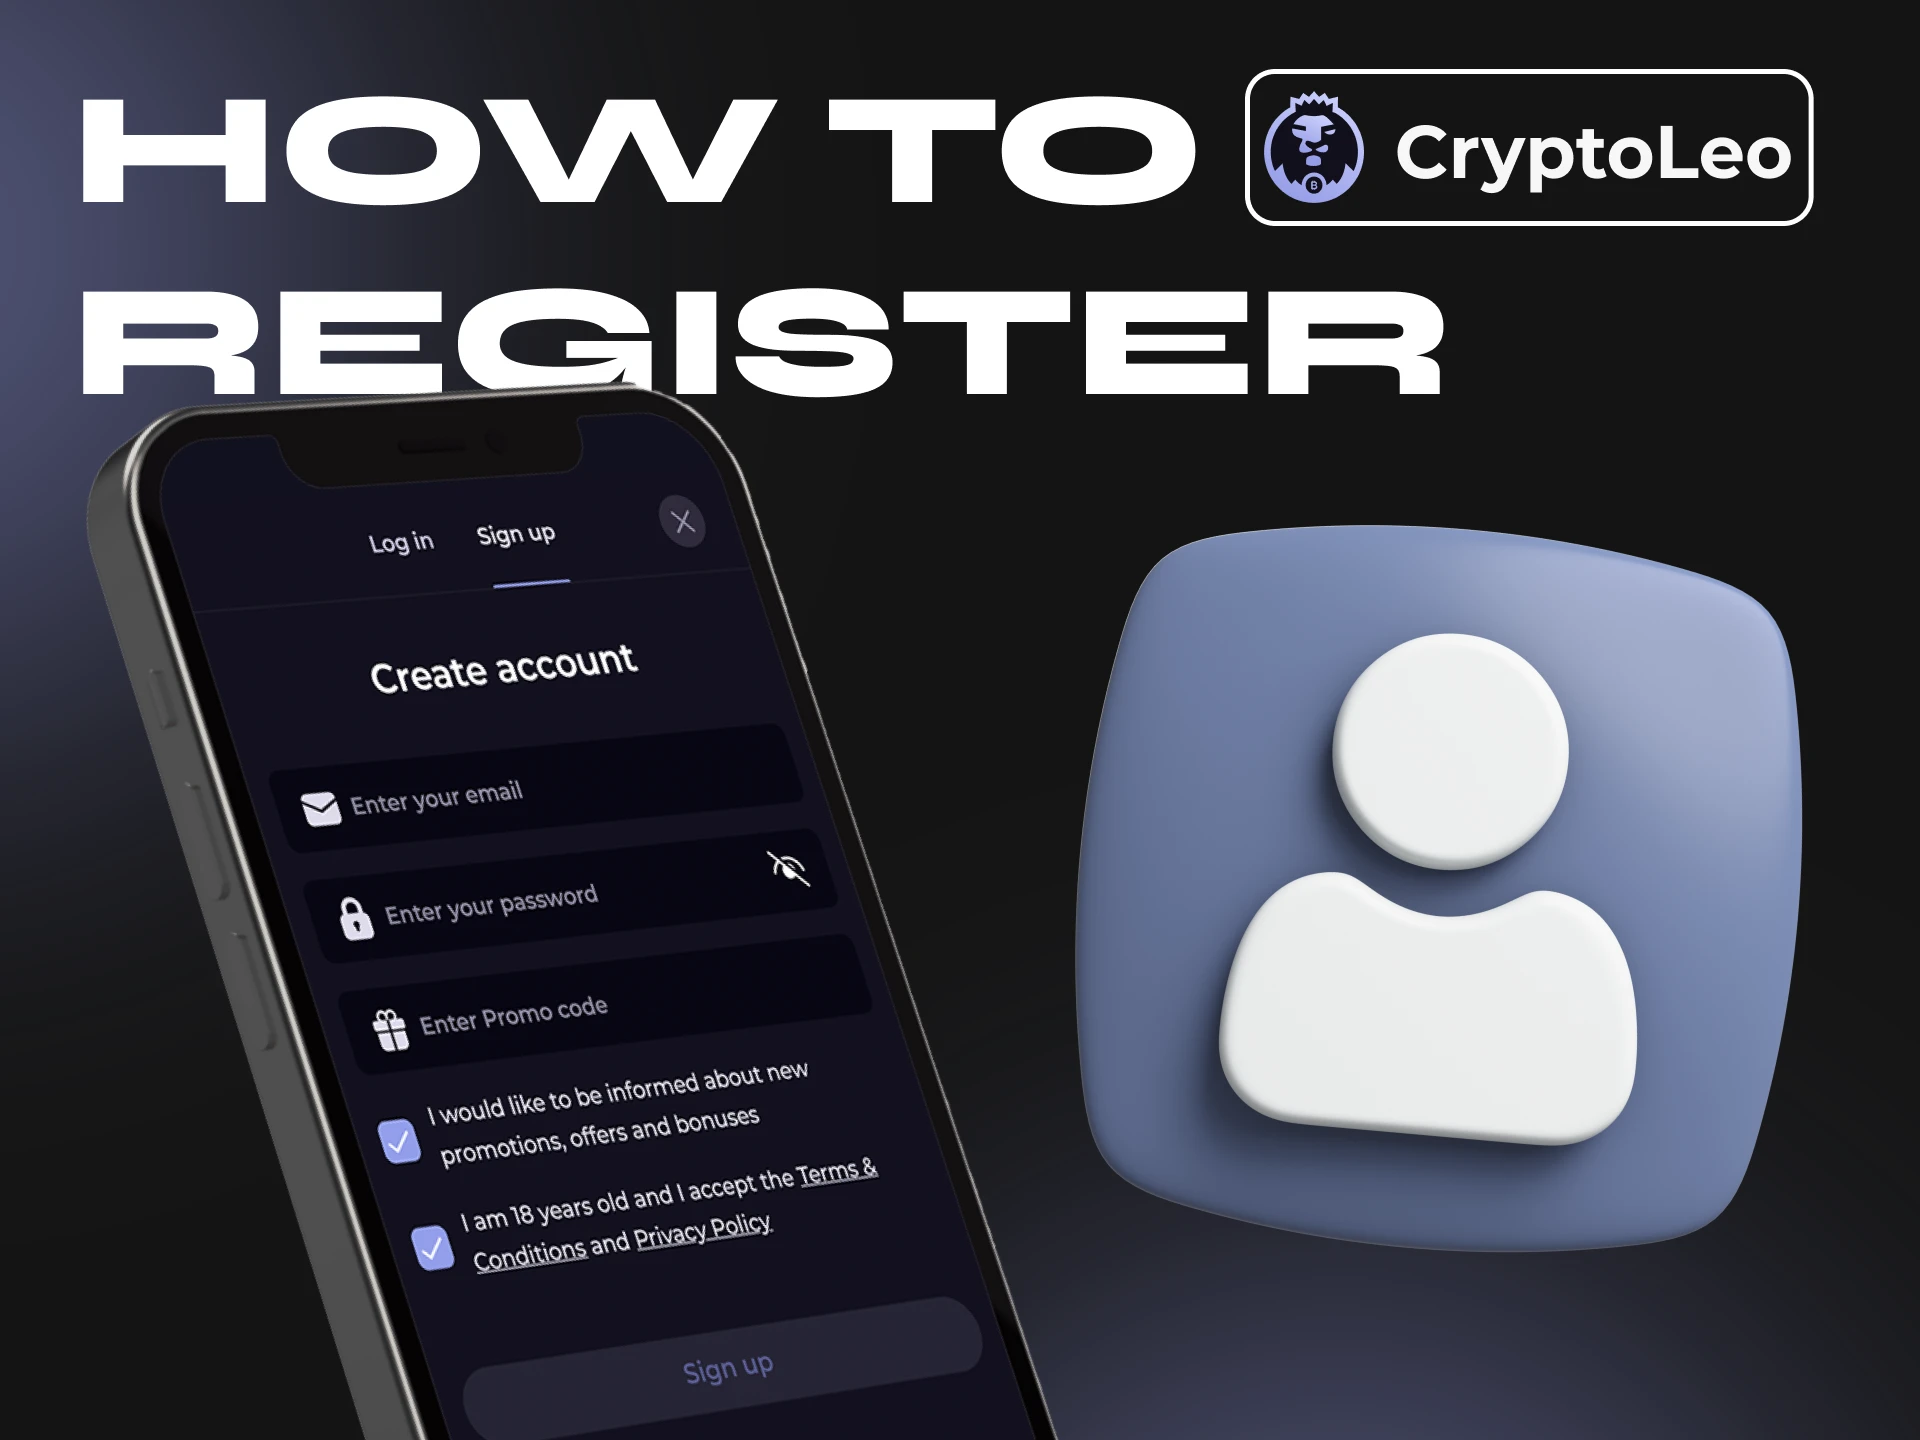 Register with the Cryptoleo app quickly and easily.